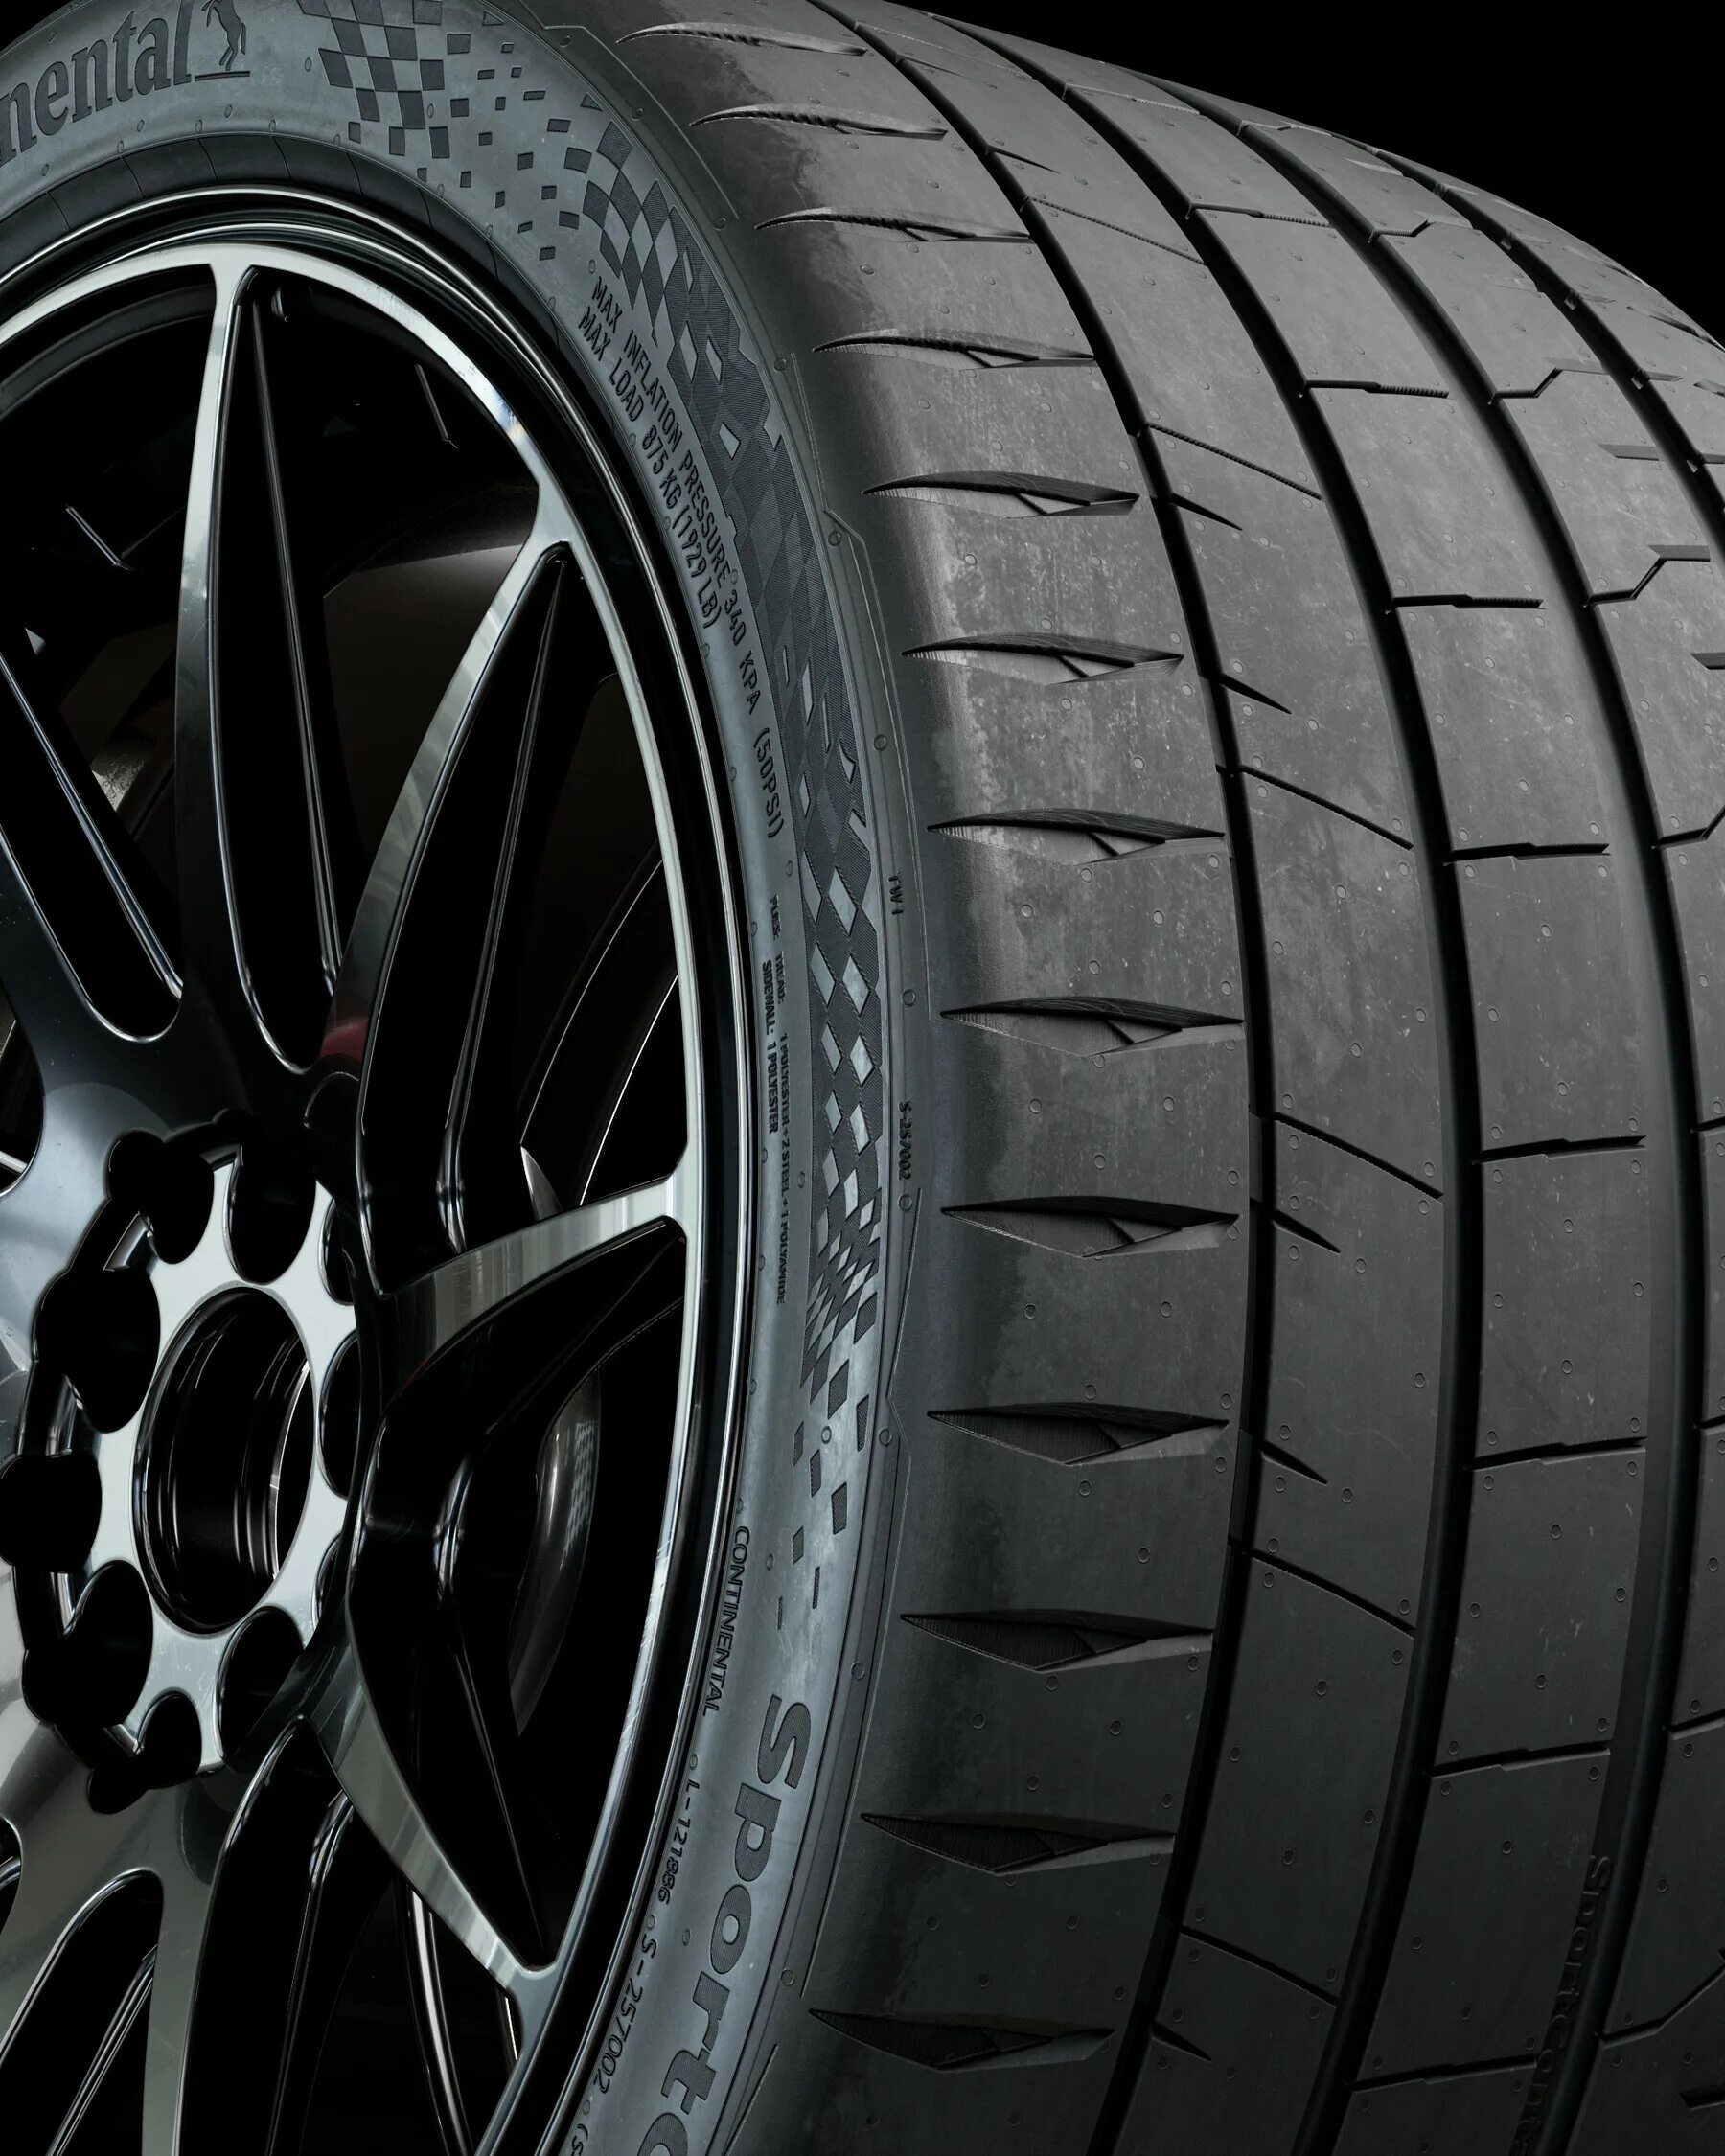 Continental SPORTCONTACT 7. Continental SPORTCONTACT 7 315/35 r22. Continental SPORTCONTACT 7 315/30 r22. CONTISPORTCONTACT 7.